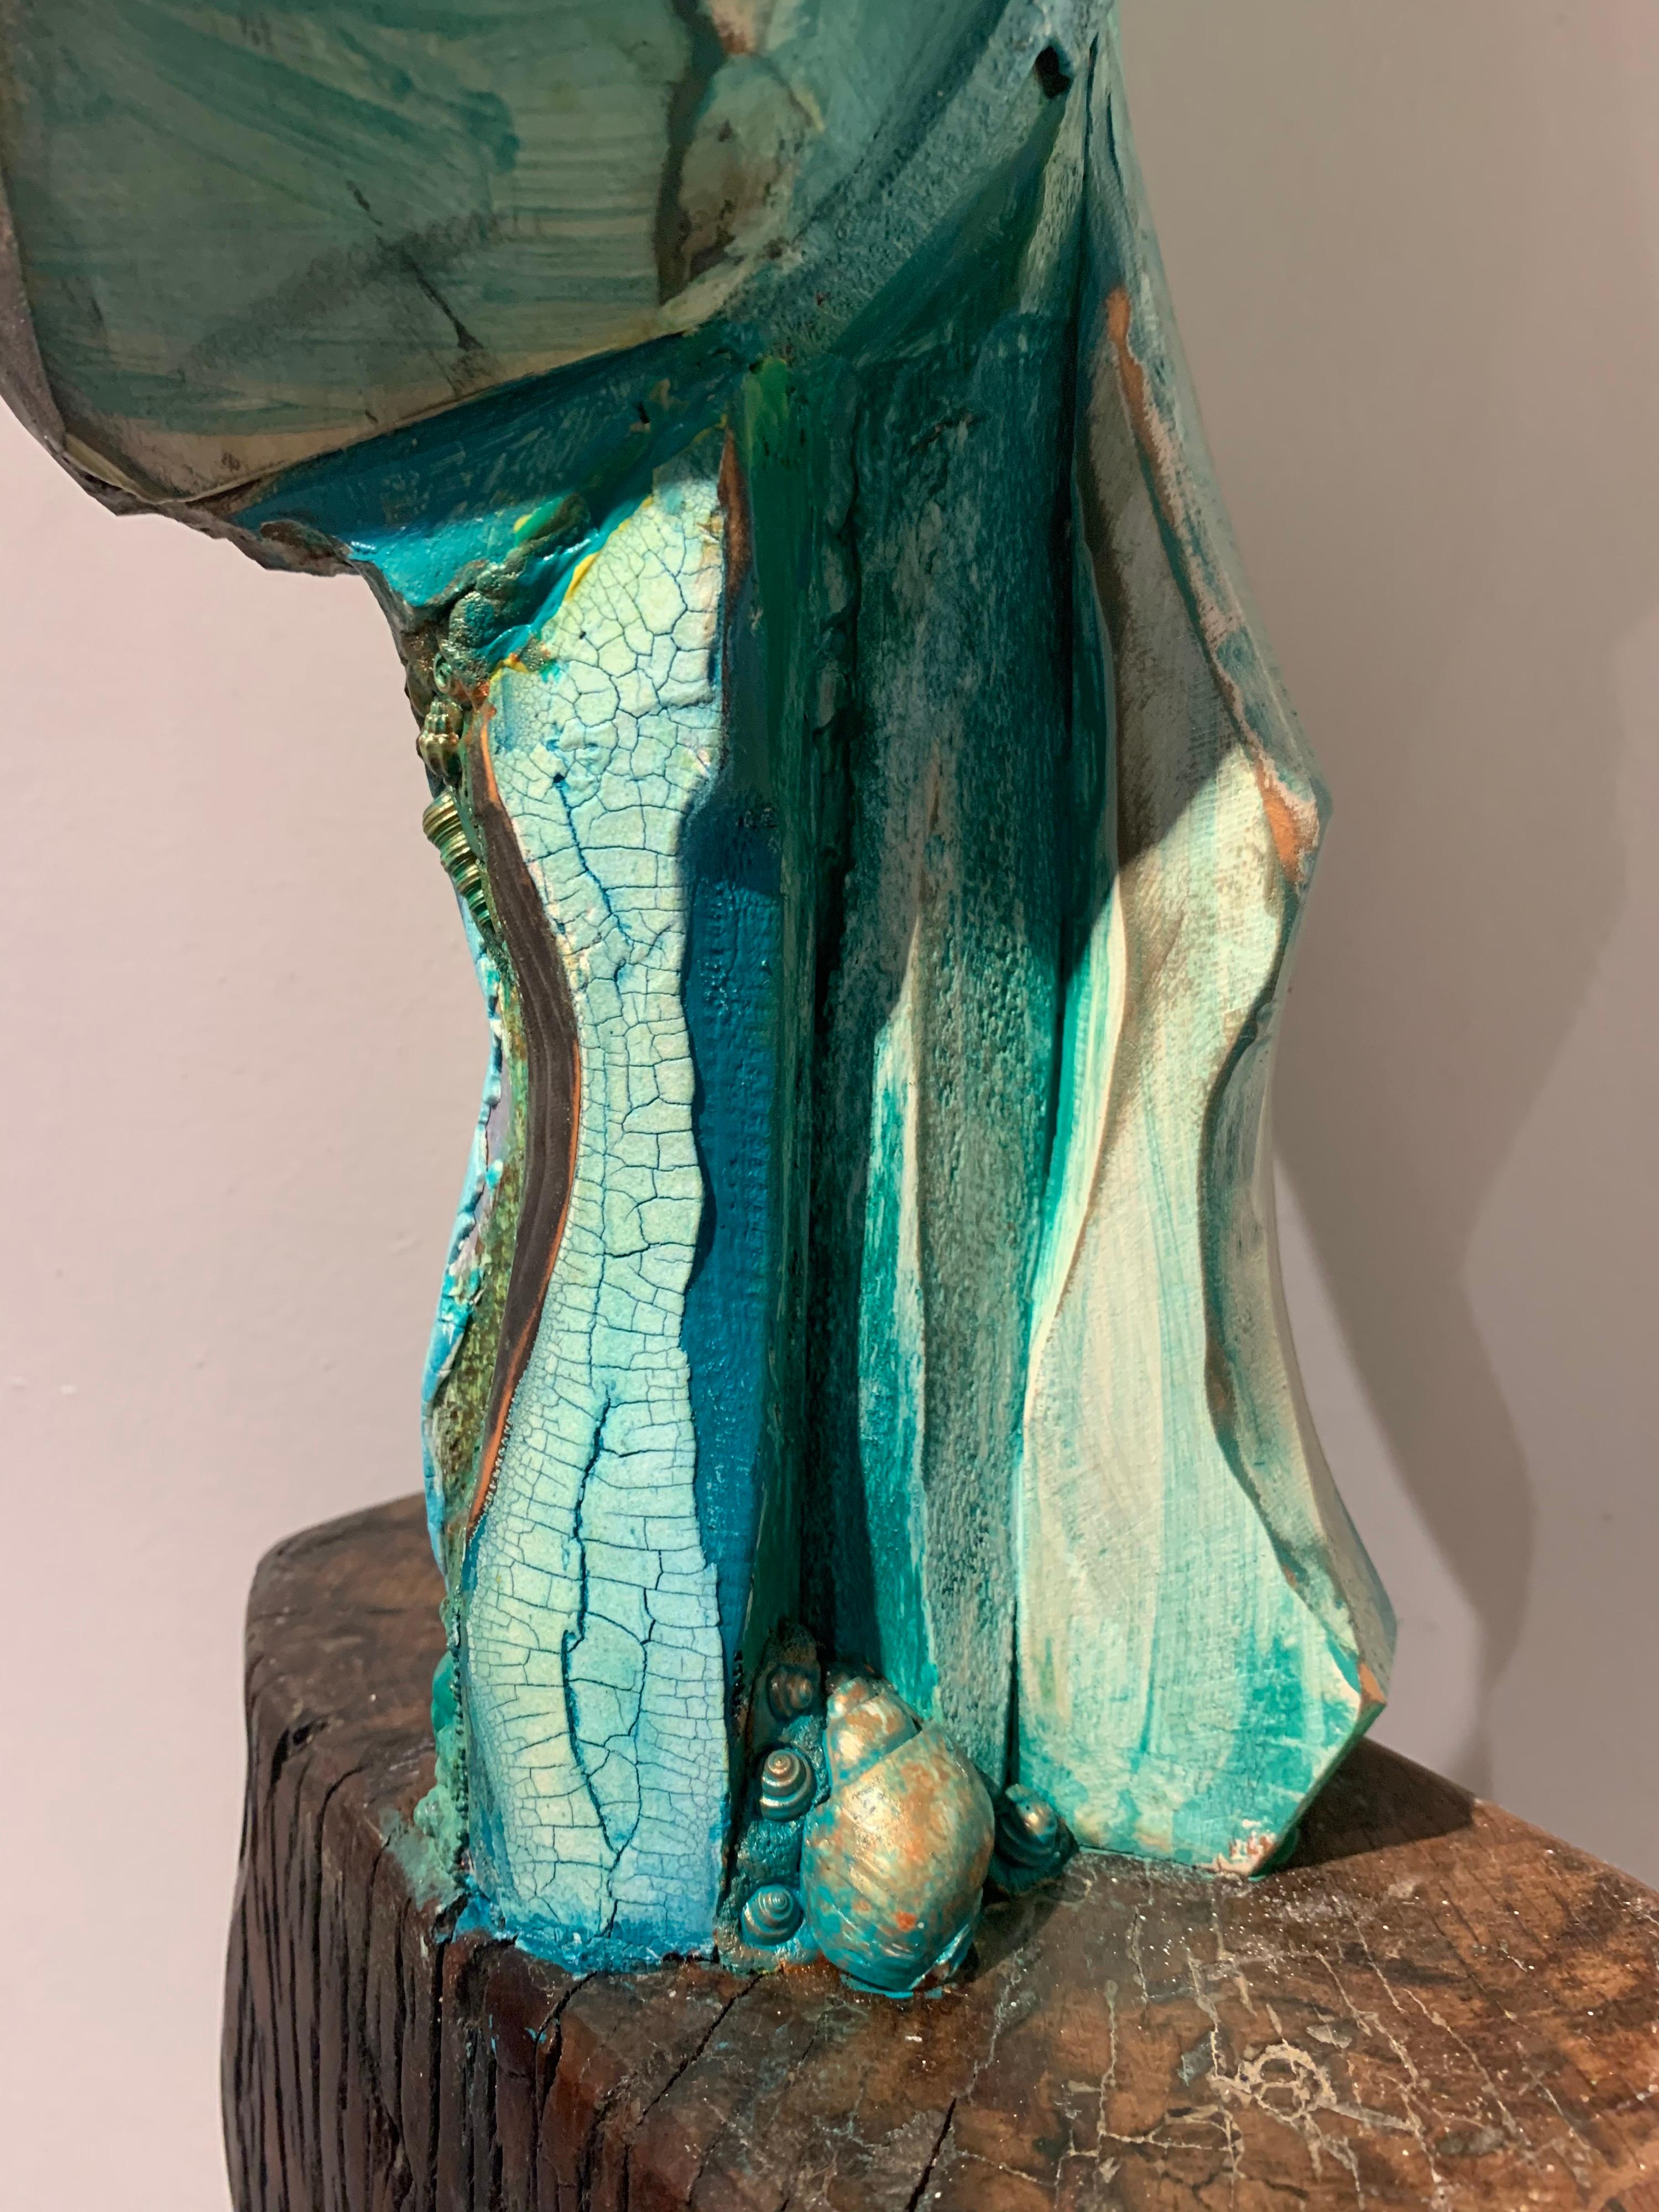 Listening, wood, acrylic, mixed media sculpture, green, blue, off white, brown 2